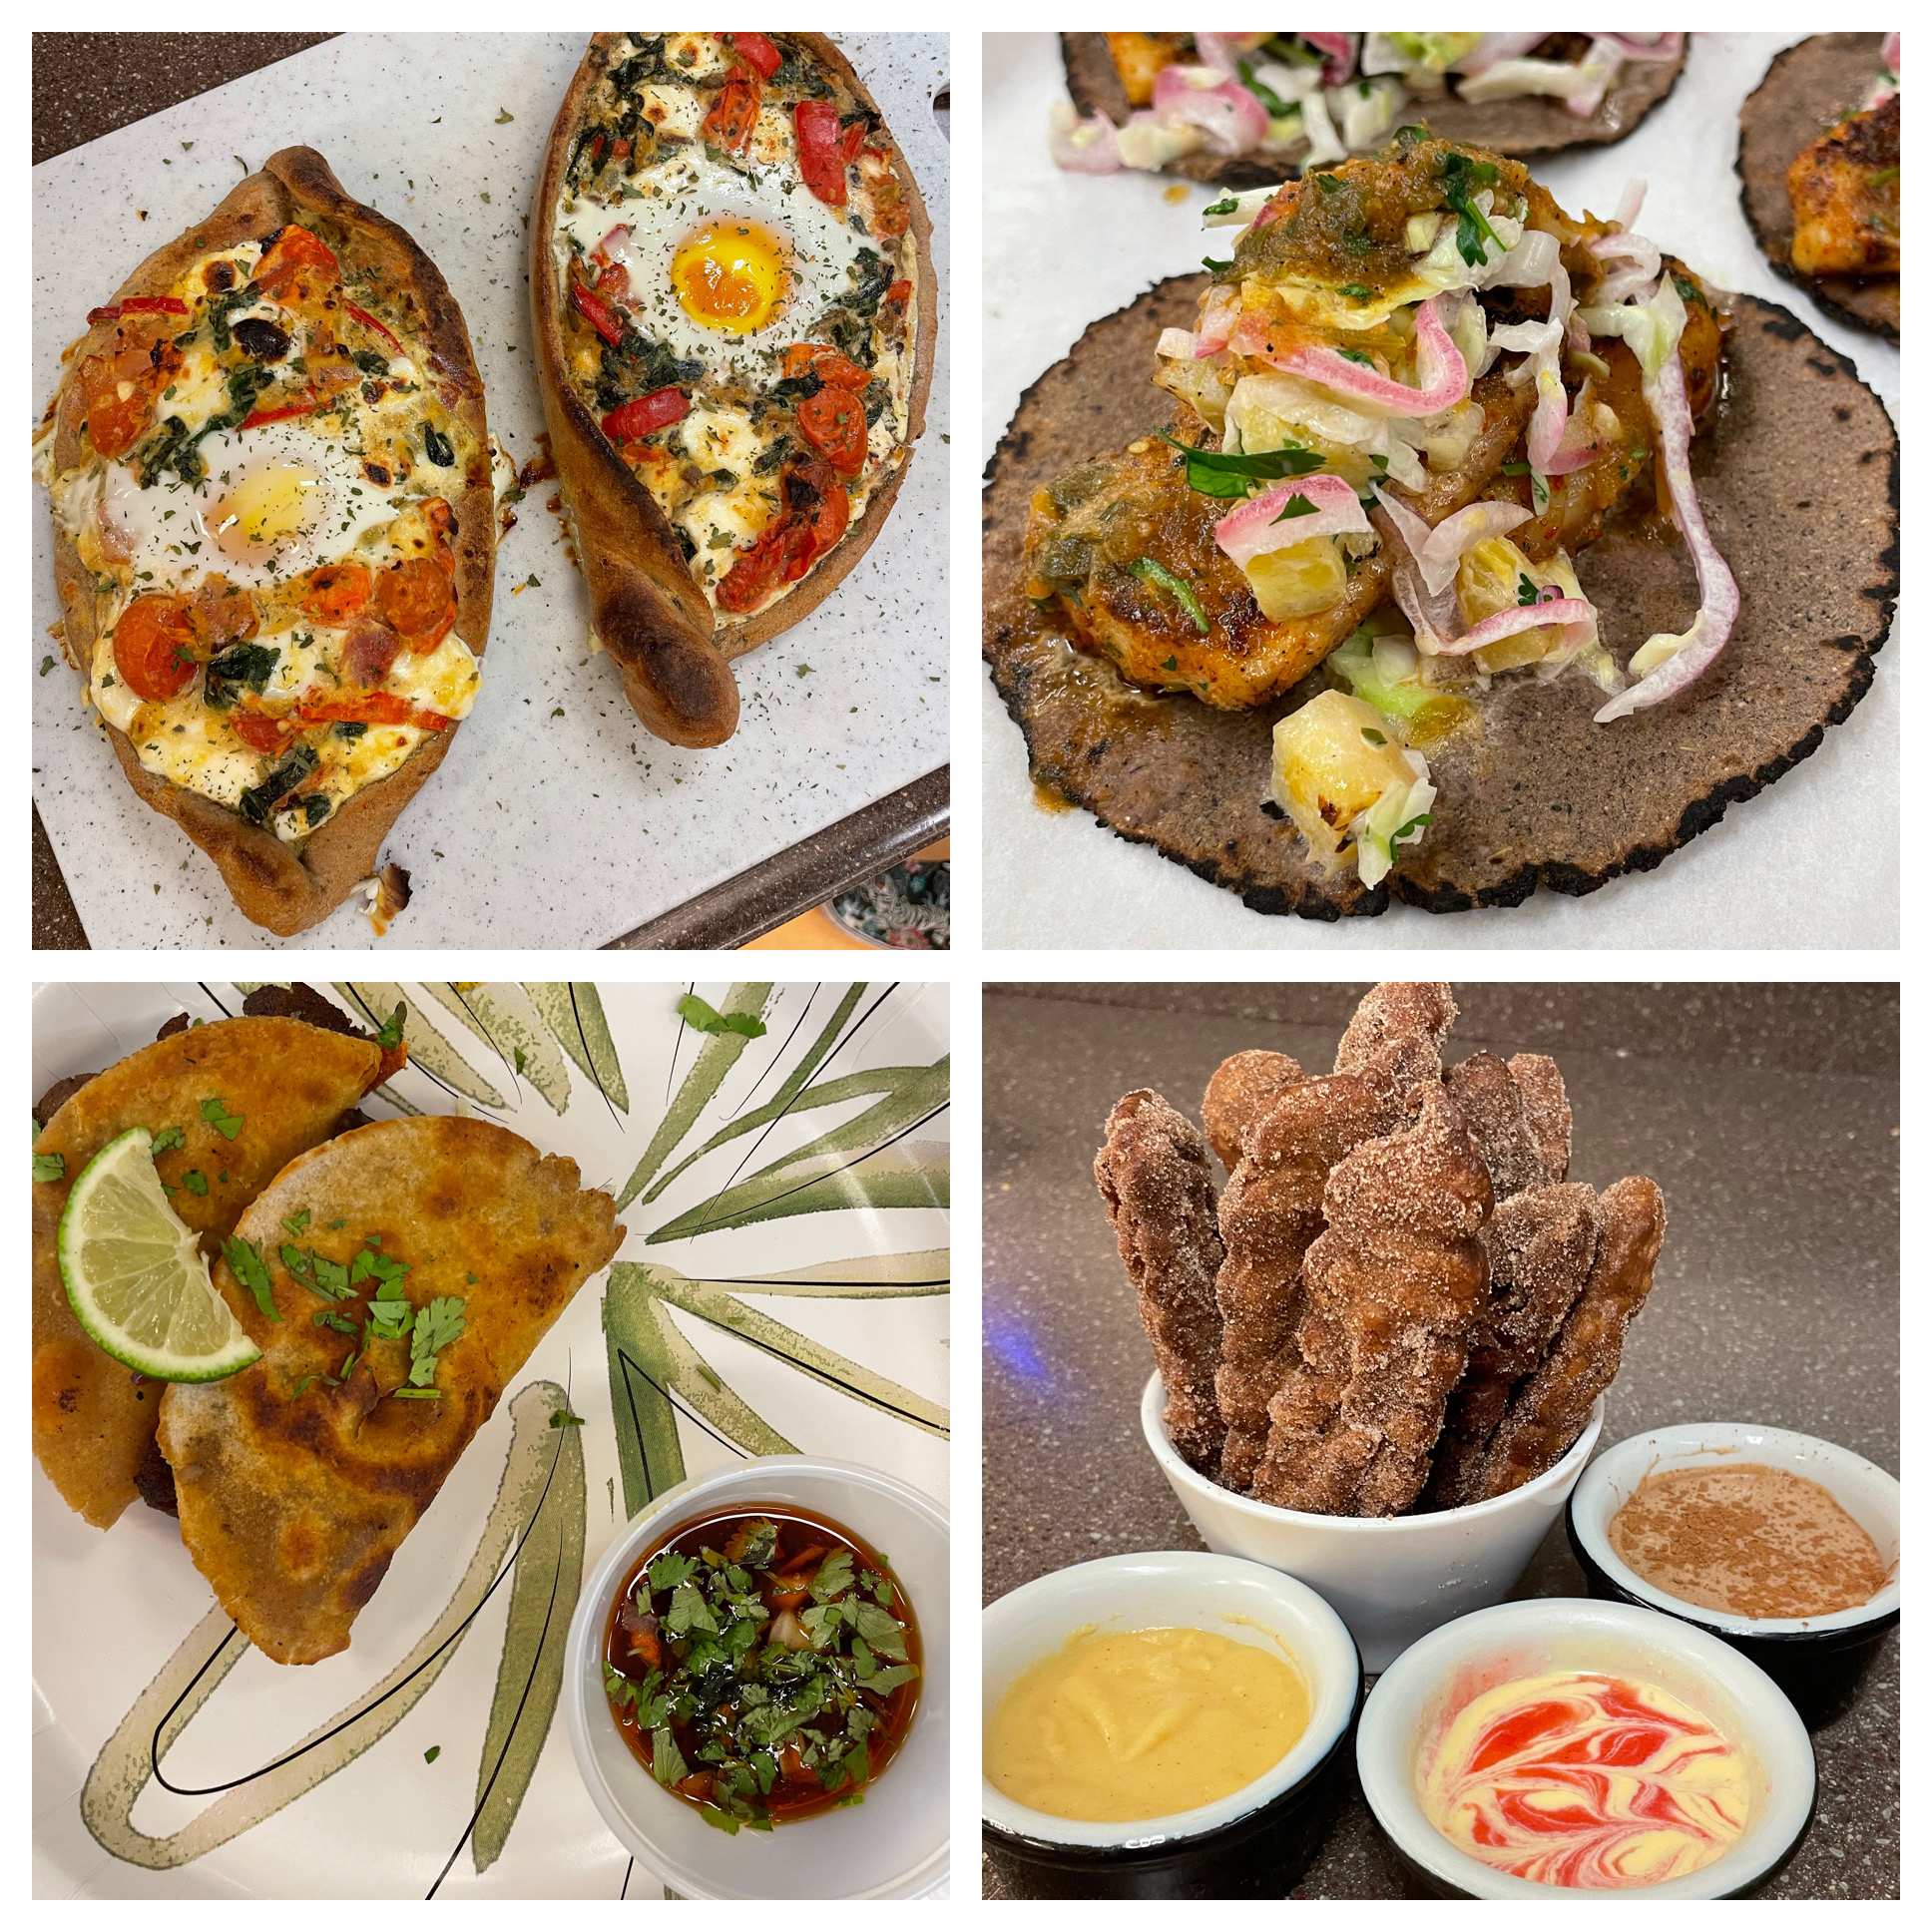 The dishes created by student teams: Georgian cheese bread (top left), cilantro-blackened fish tacos (top right), quesabirria tacos with seitan (bottom left) and cinnamon sugar churros (bottom right). Photos by: Tiffany Dobbyn, UC Davis.